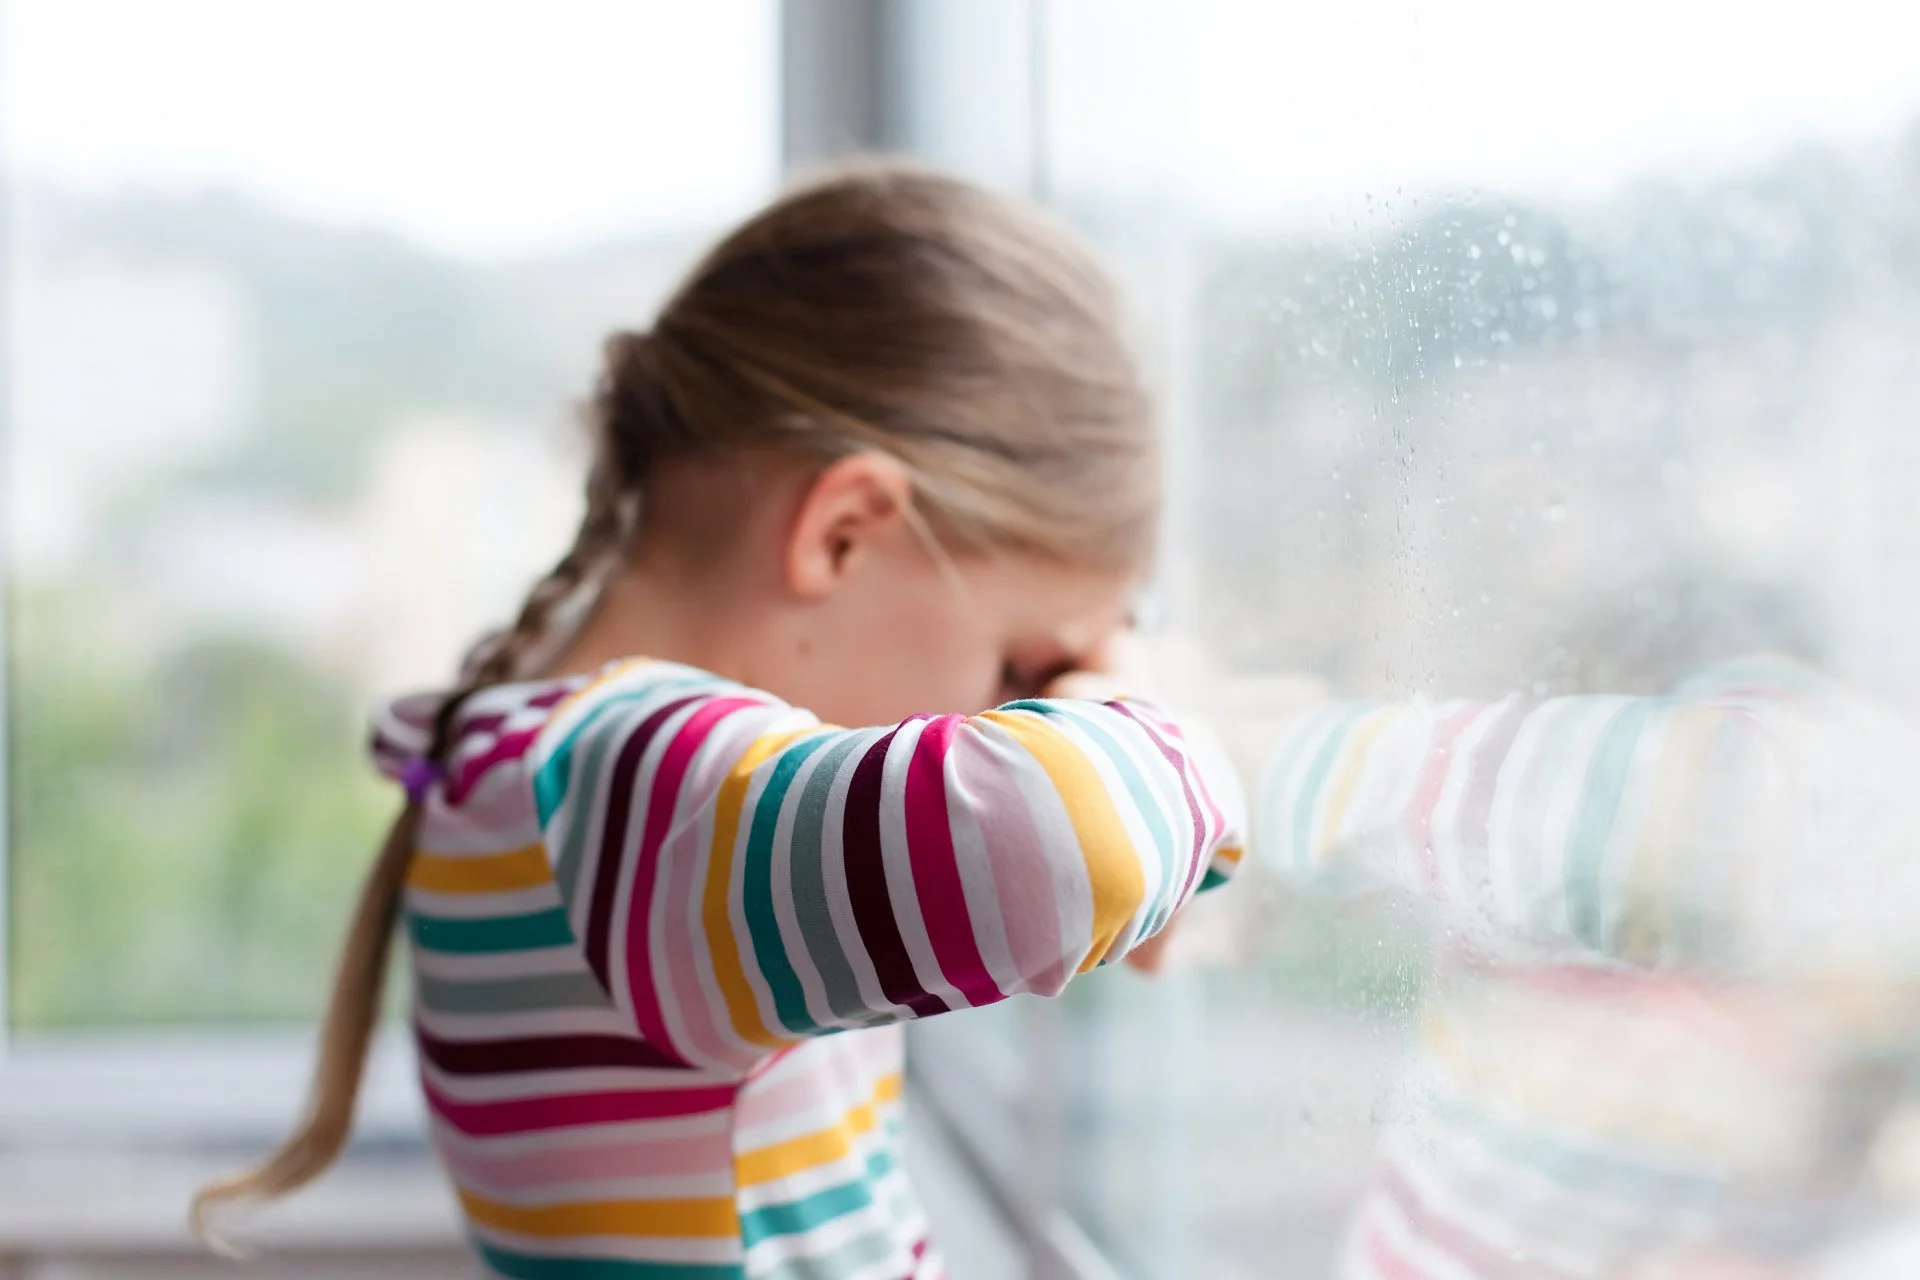 Children’s Mental Health: What You Need to Know